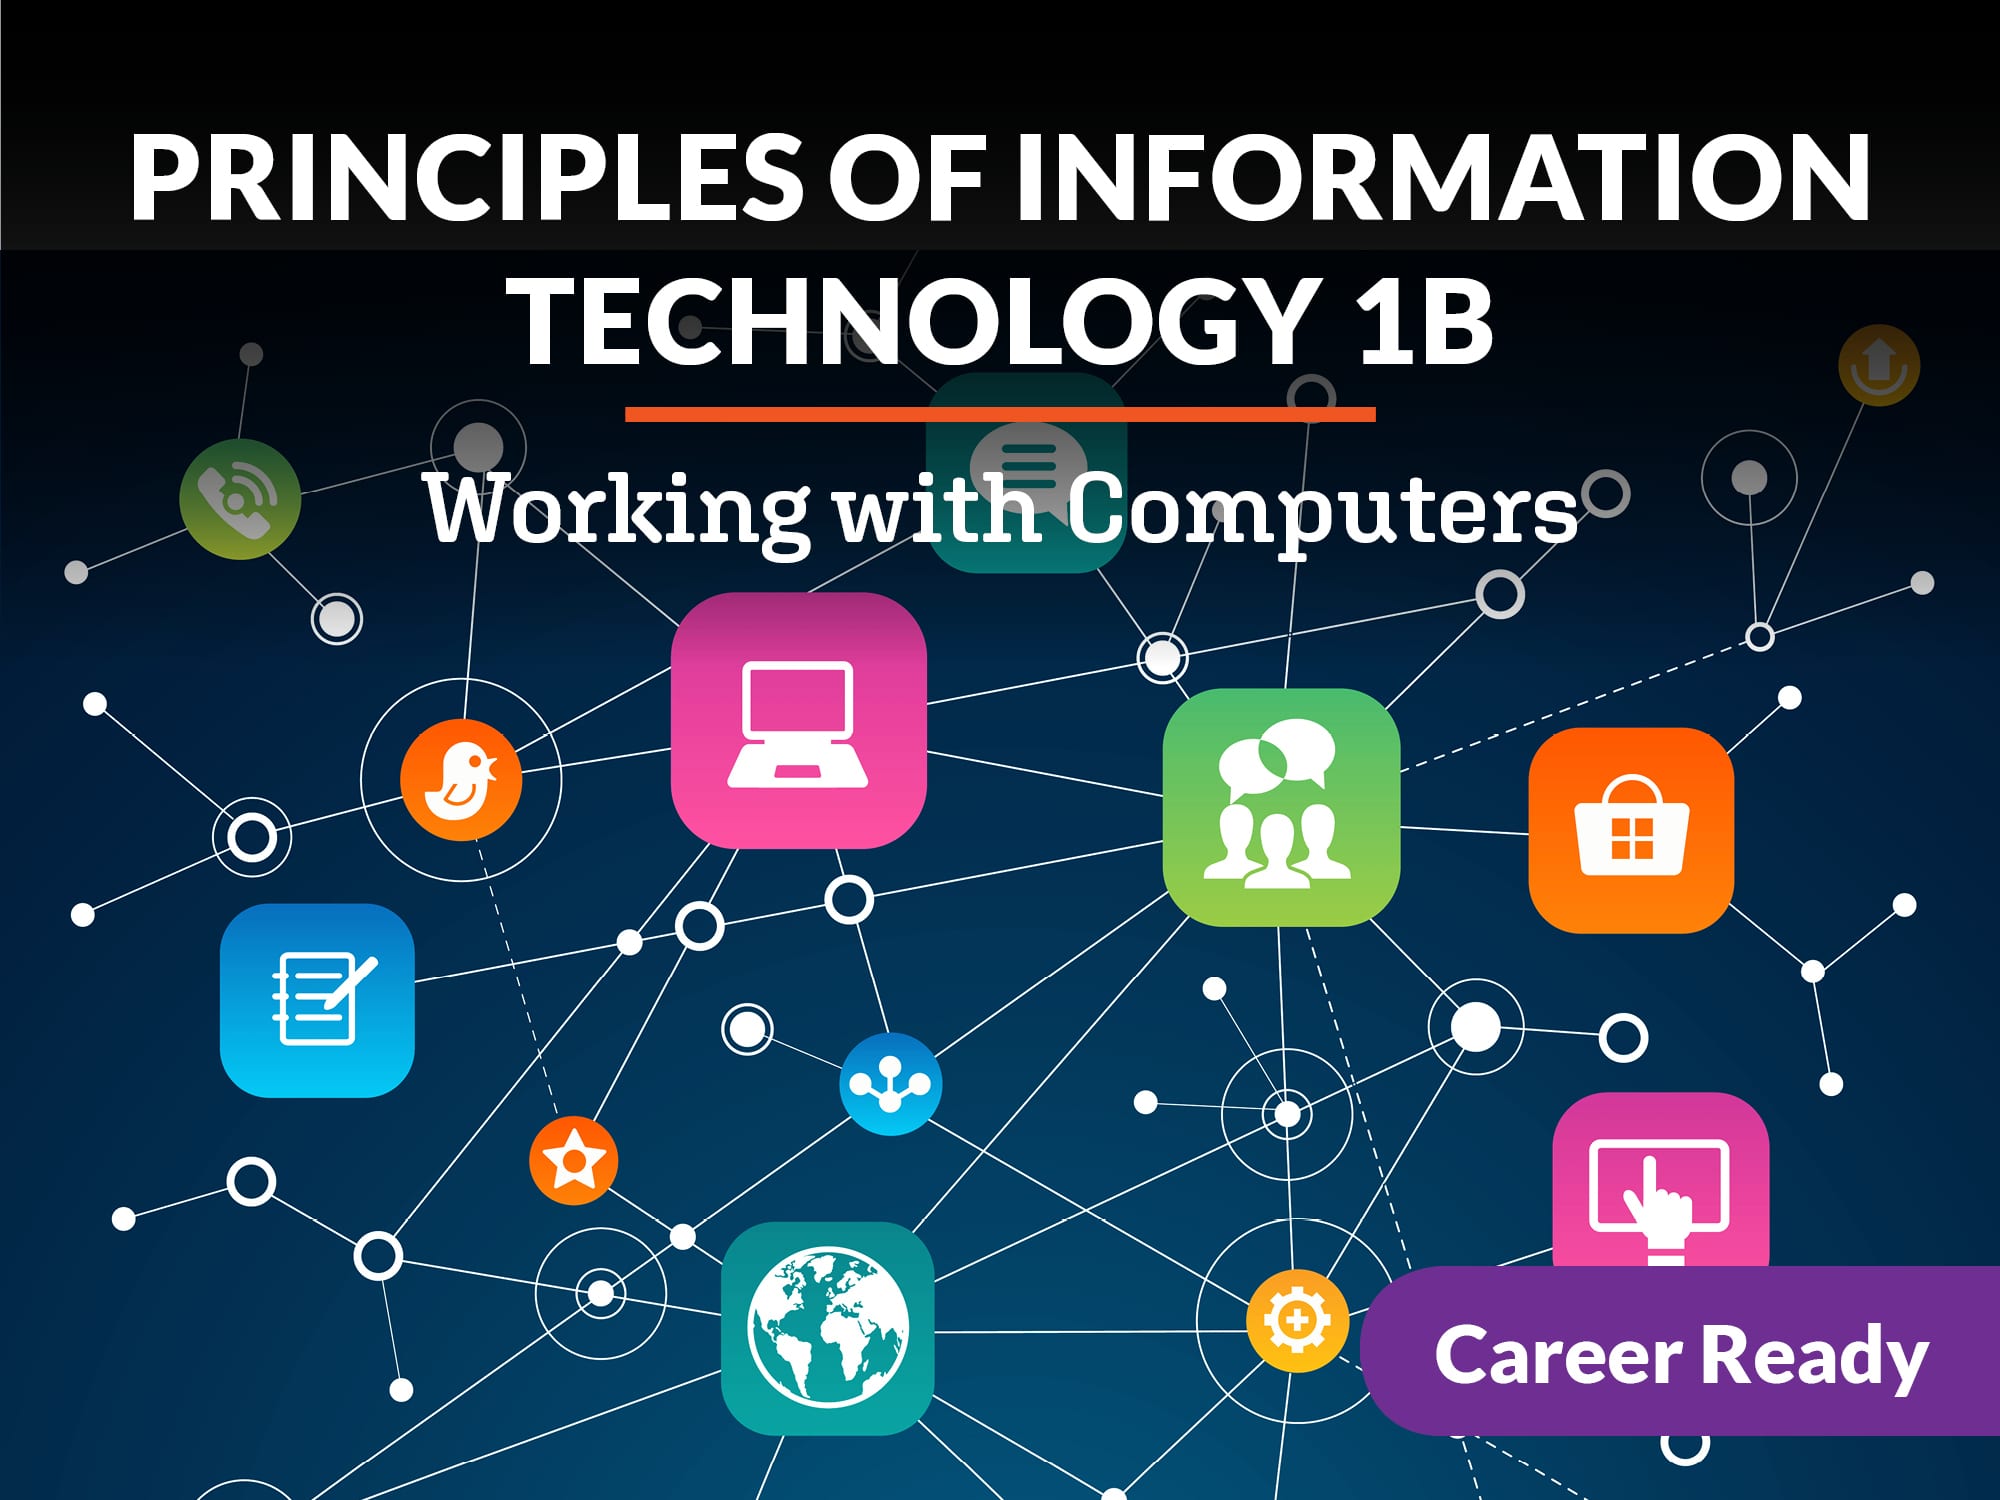 Principles of Information Technology 1B: Working with Computers